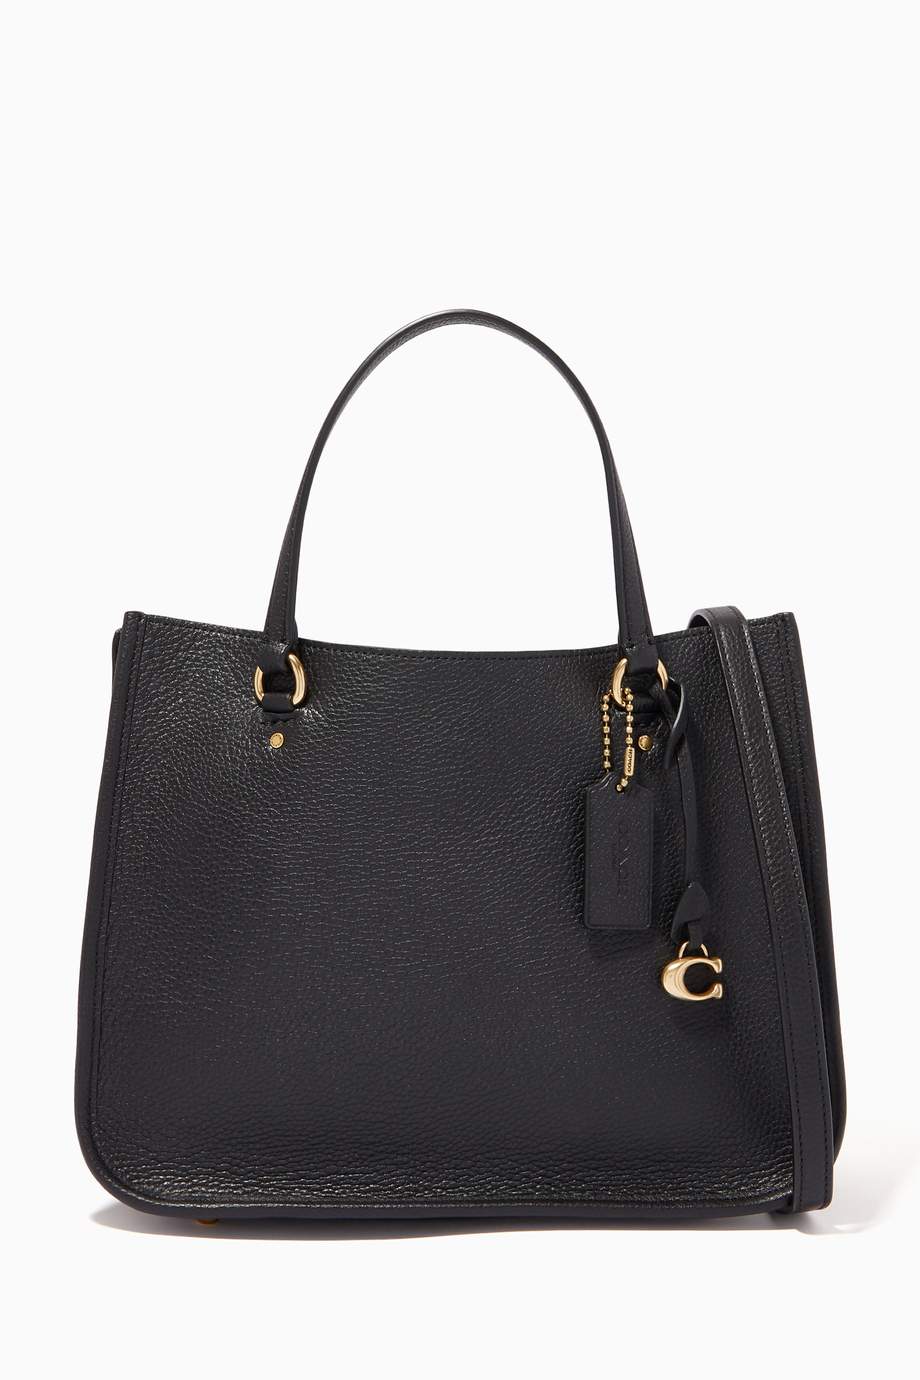 Shop Coach Black Tyler Carryall in Pebbled leather for Women | Ounass UAE